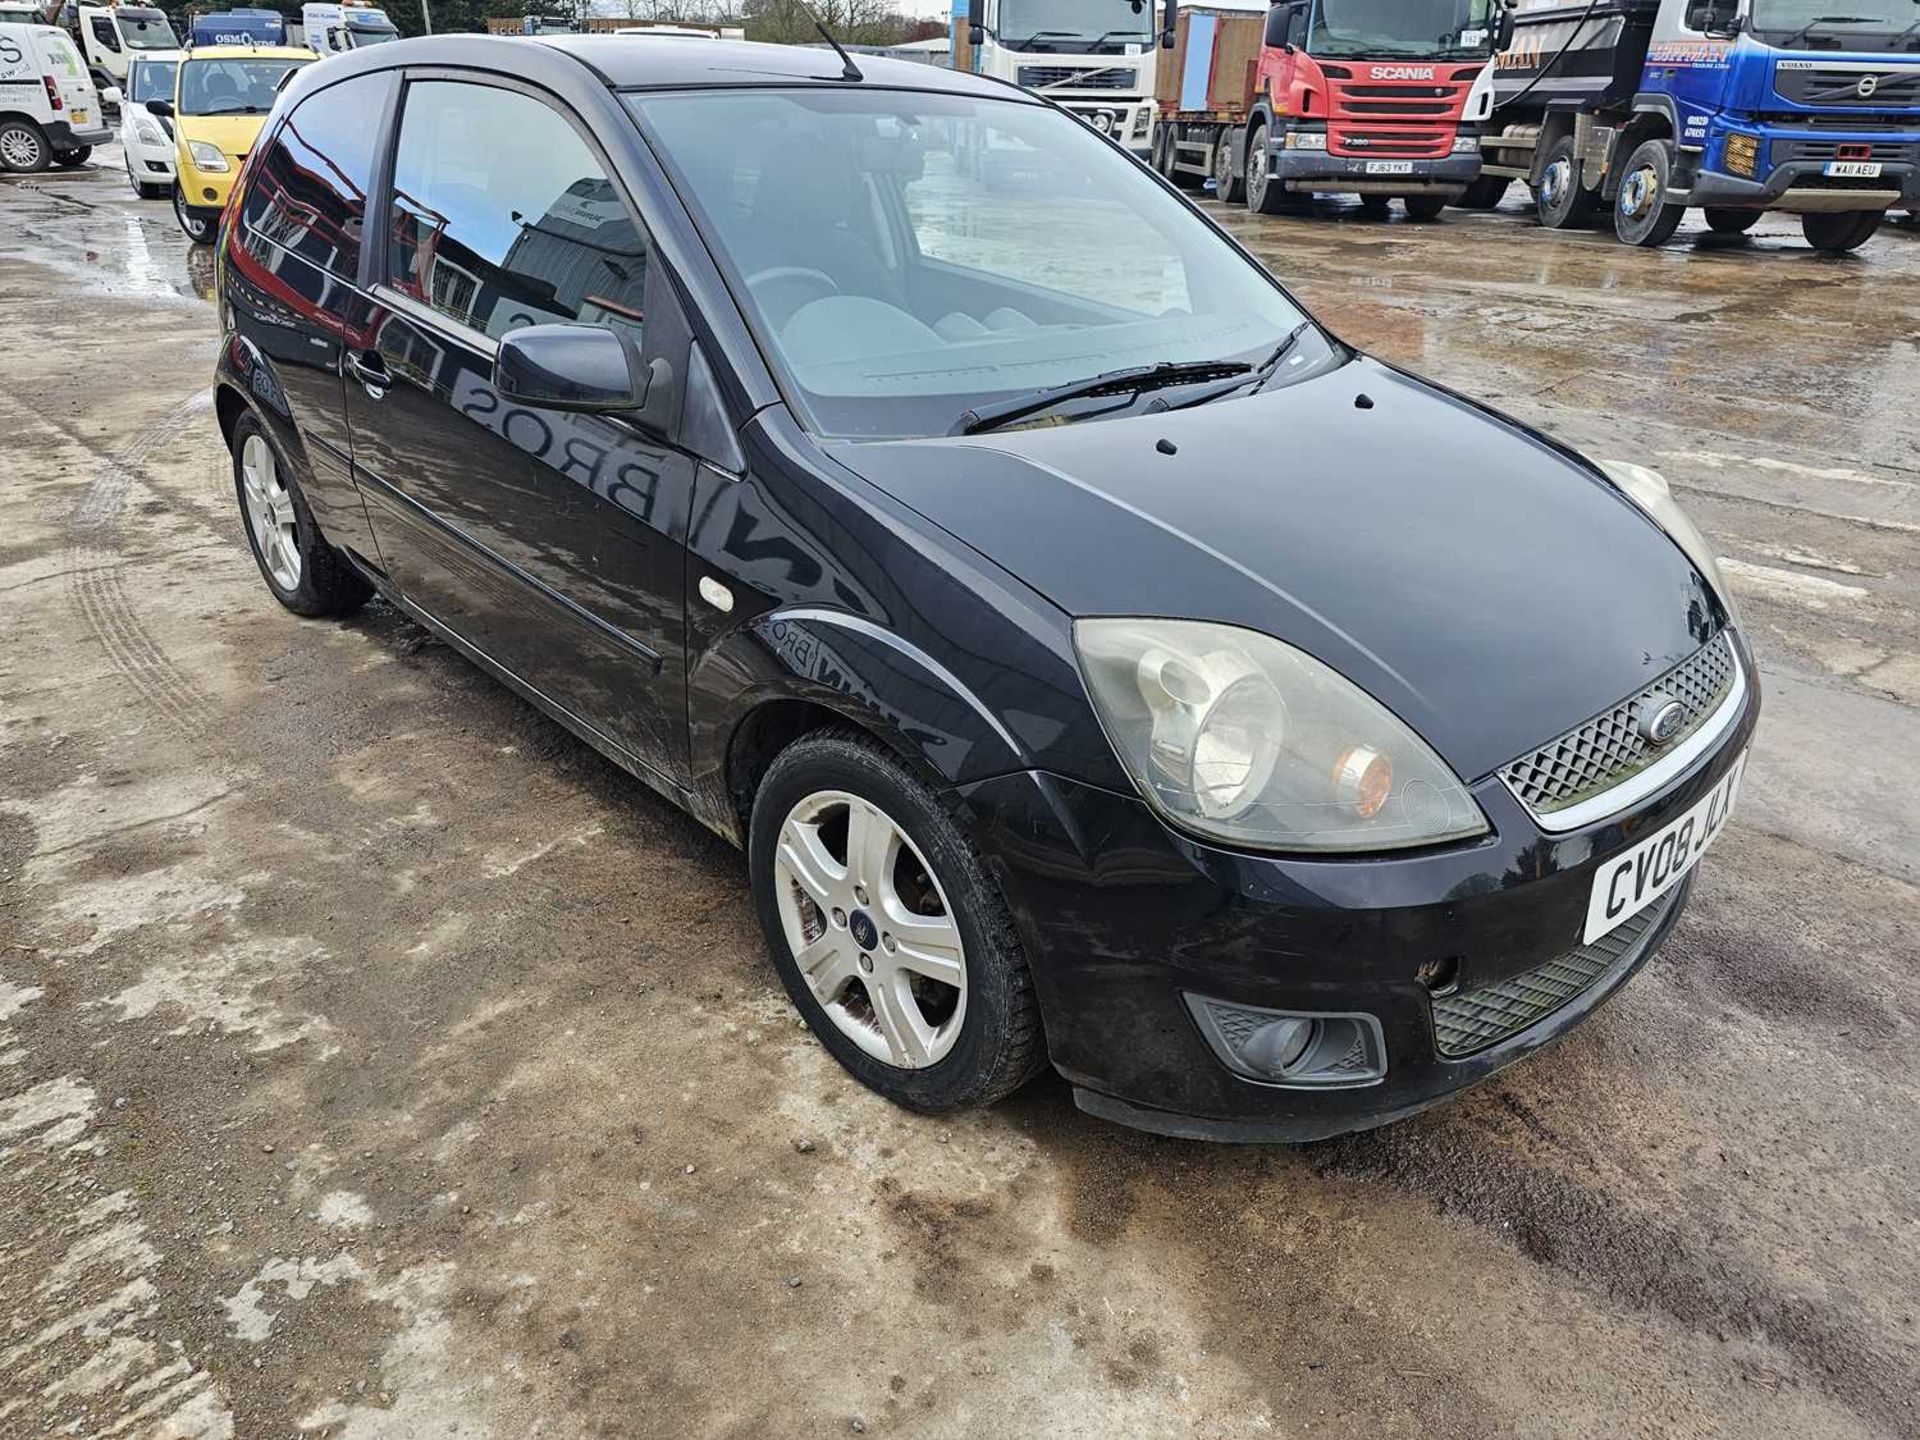 2008 Ford Fiesta Zetec Climate, 5 Speed, A/C (Reg. Docs. Available) - Image 6 of 26